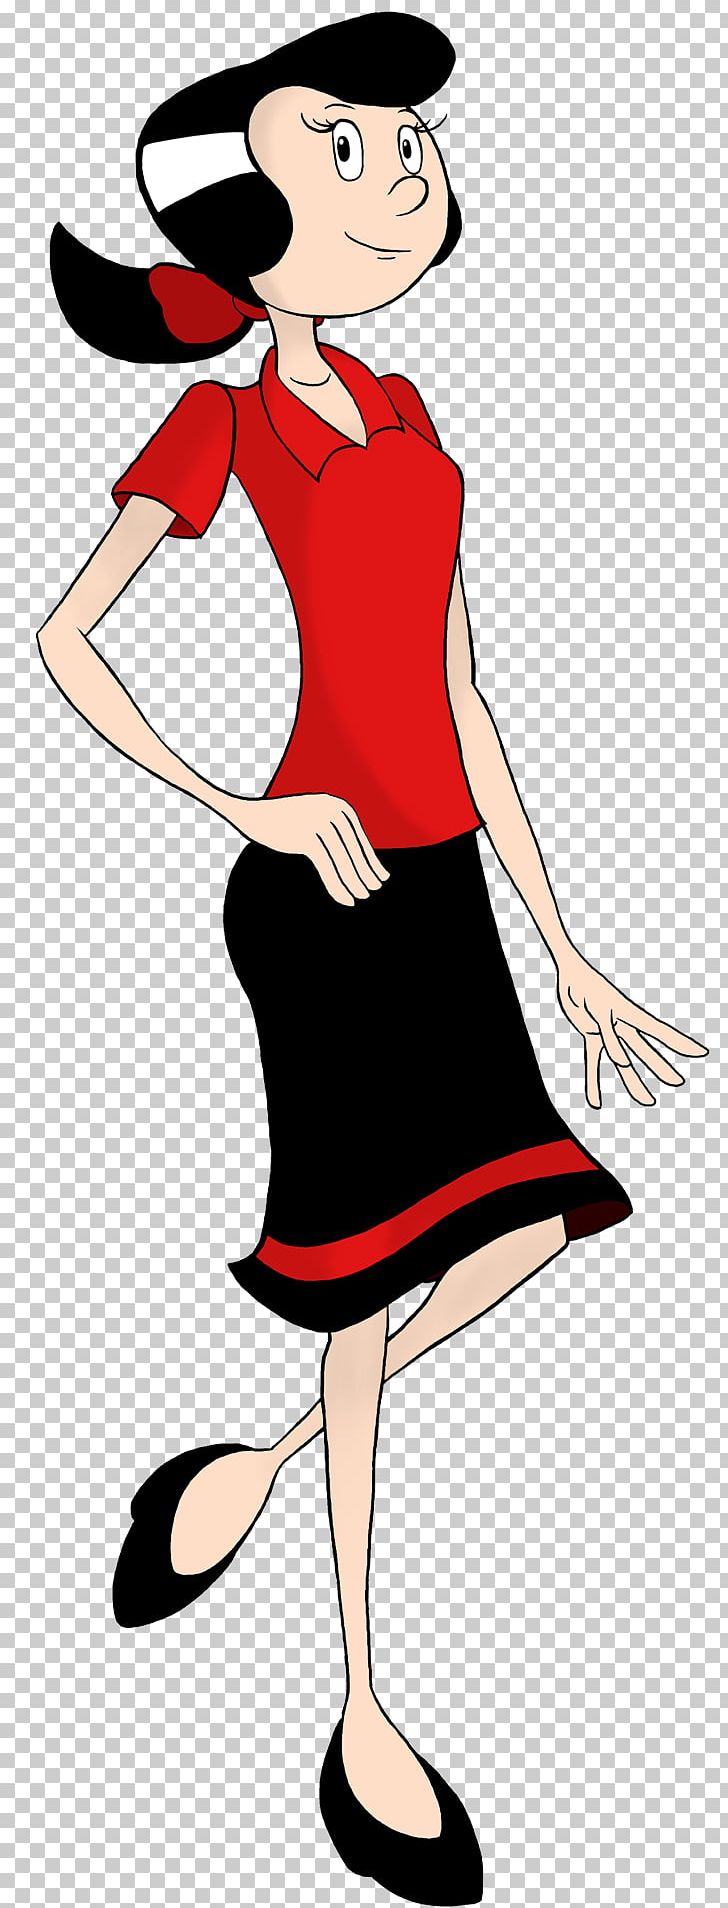 Olive Oyl Popeye Bluto Cartoon PNG, Clipart, Arm, Bluto, Cartoon, Clothing,  Comics Free PNG Download